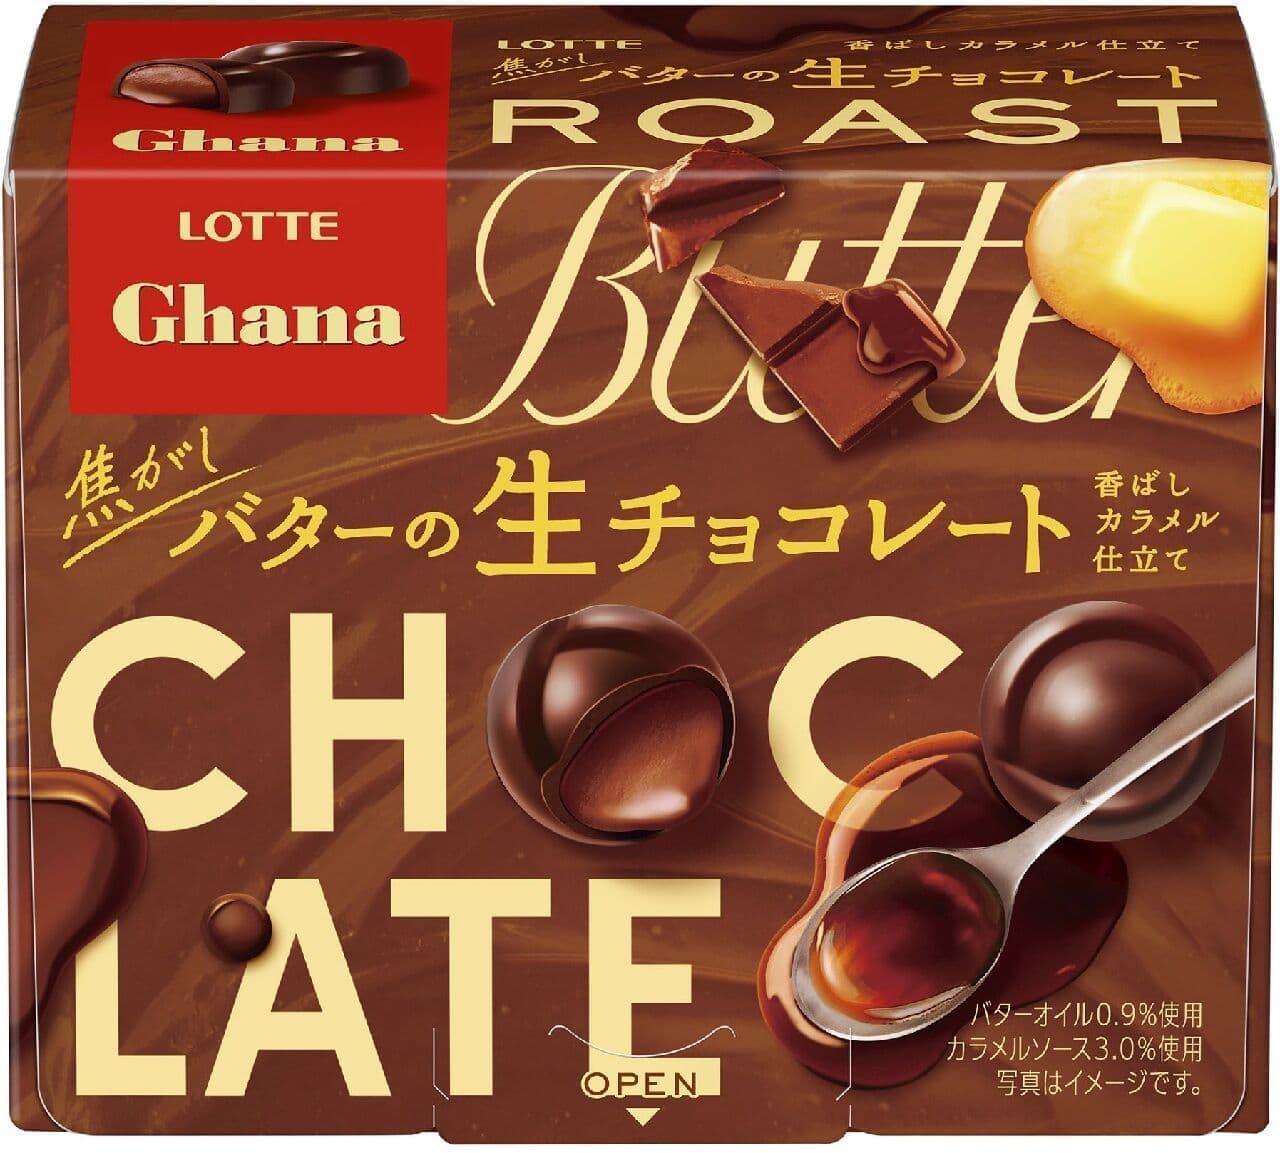 Lotte "Ghana [raw chocolate with charred butter]"